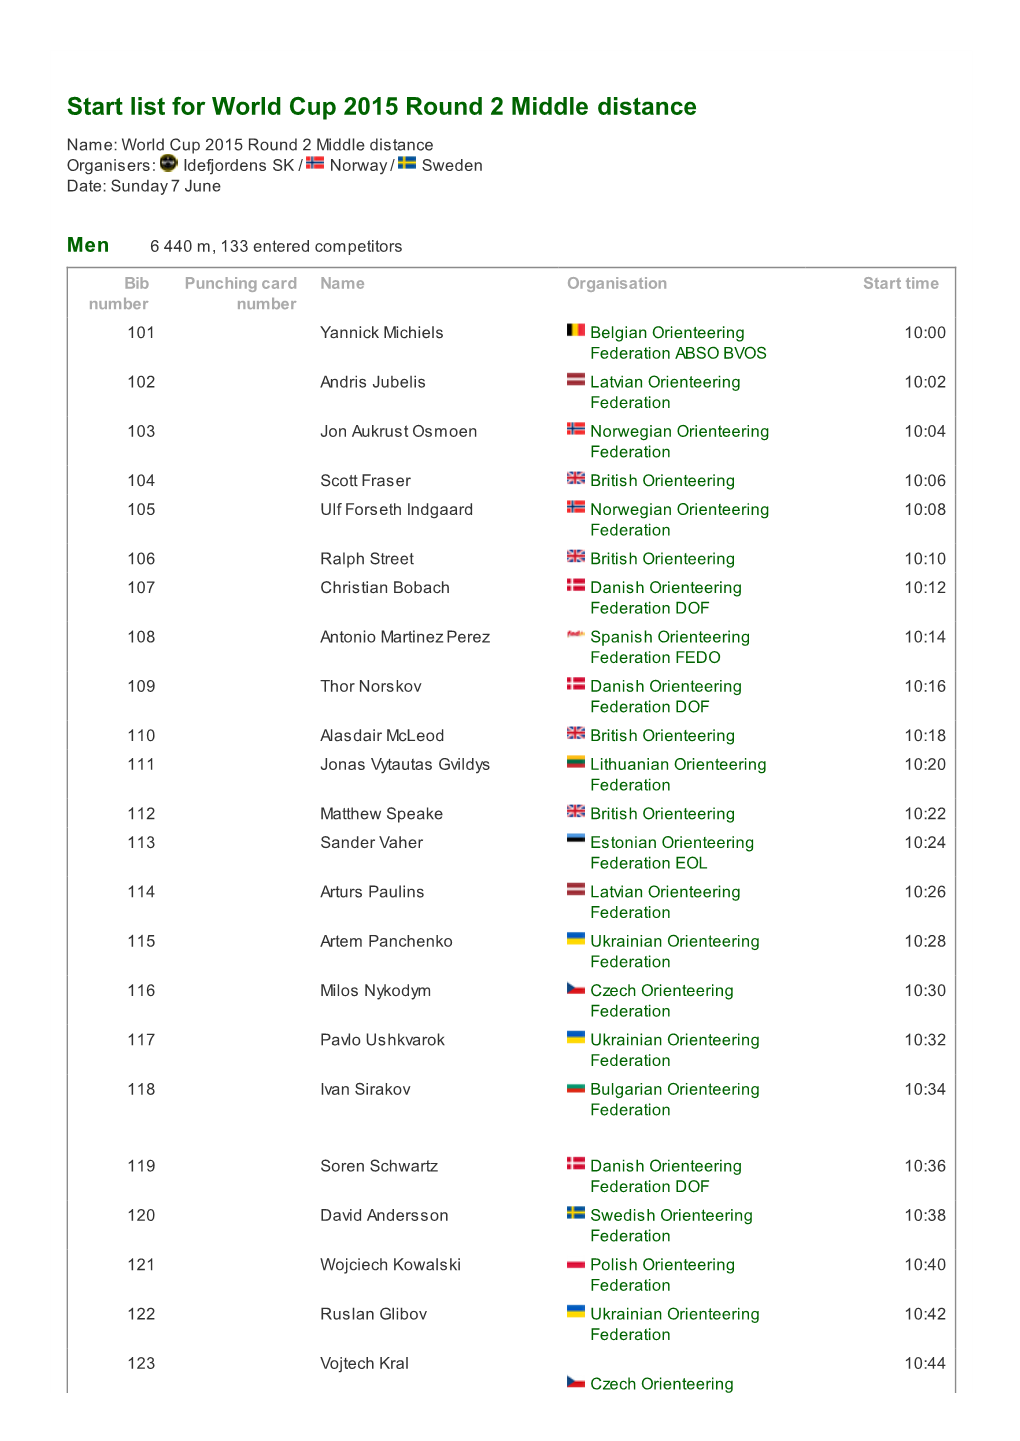 Start List for World Cup 2015 Round 2 Middle Distance